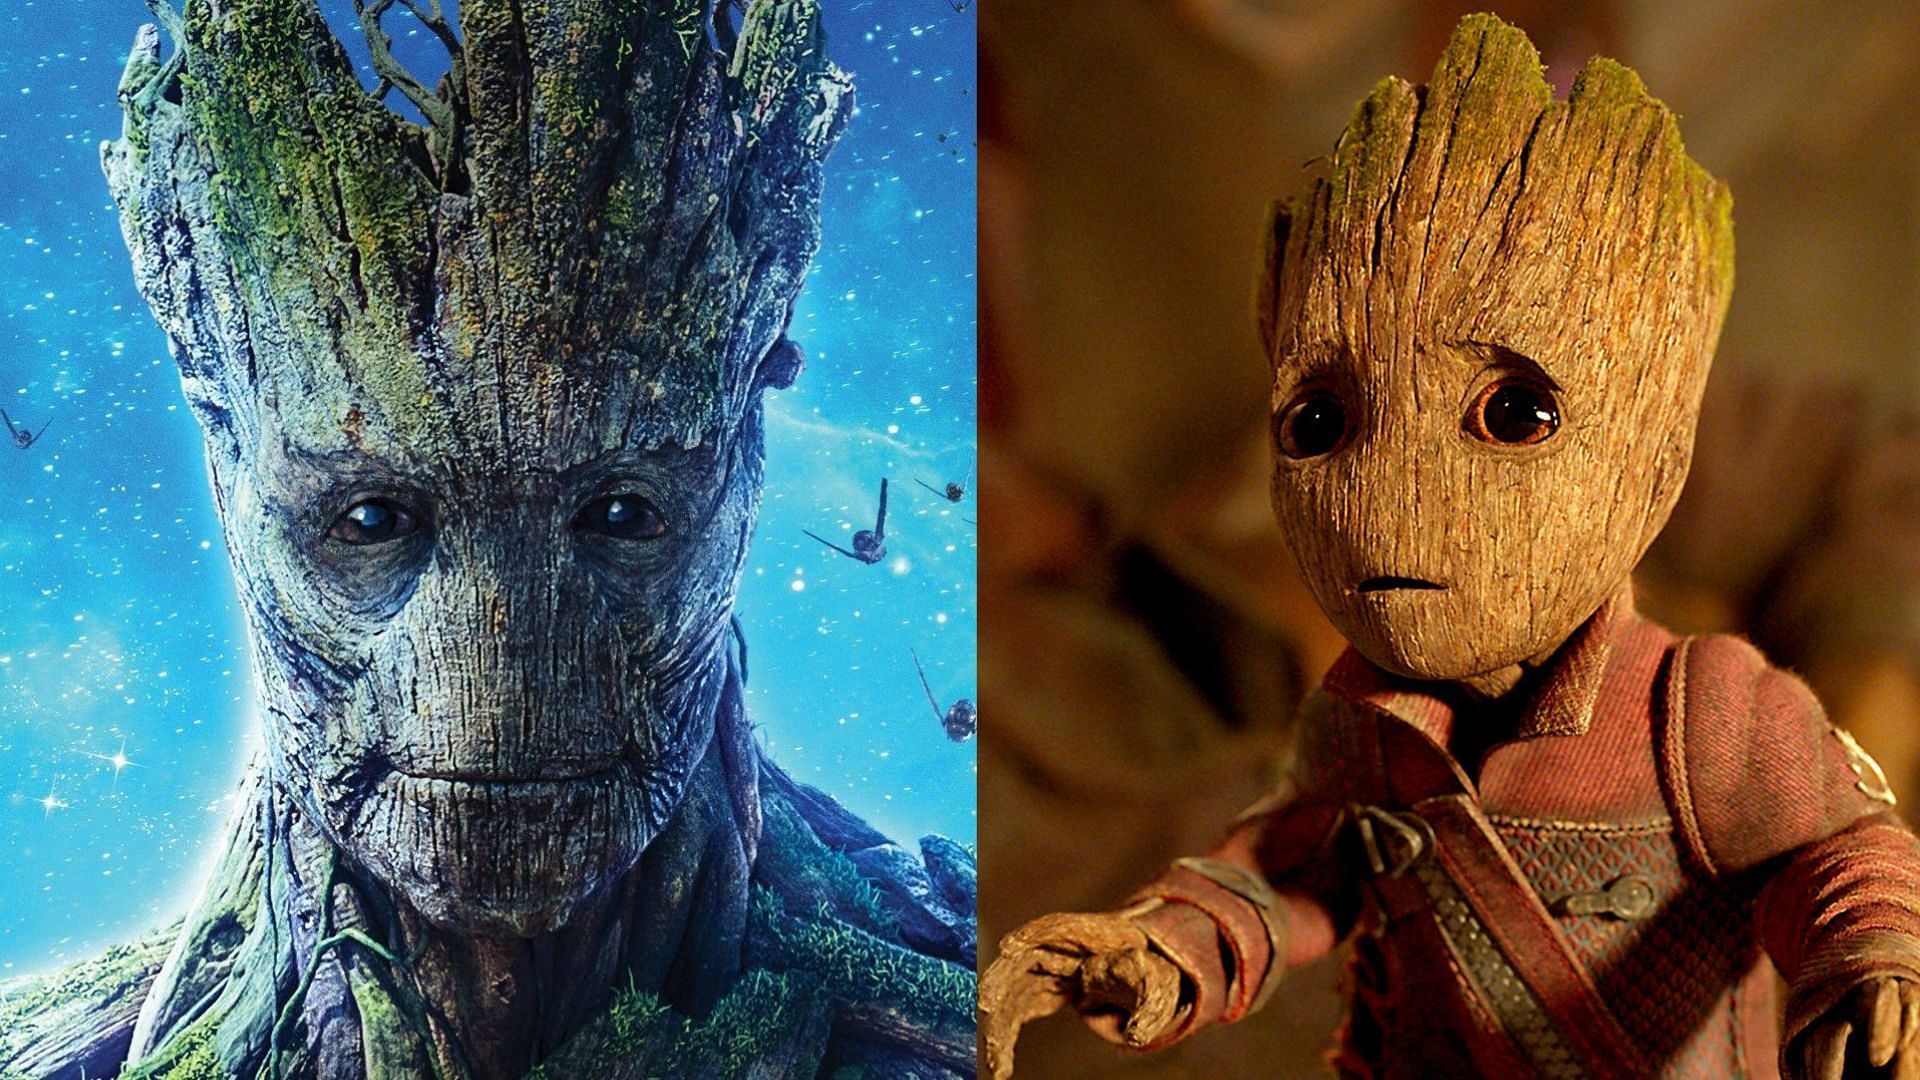 Left: Groot in Guardians of the Galaxy, Right: Baby Groot in Guardians of the Galaxy Vol. 2 (images via Marvel Studios)